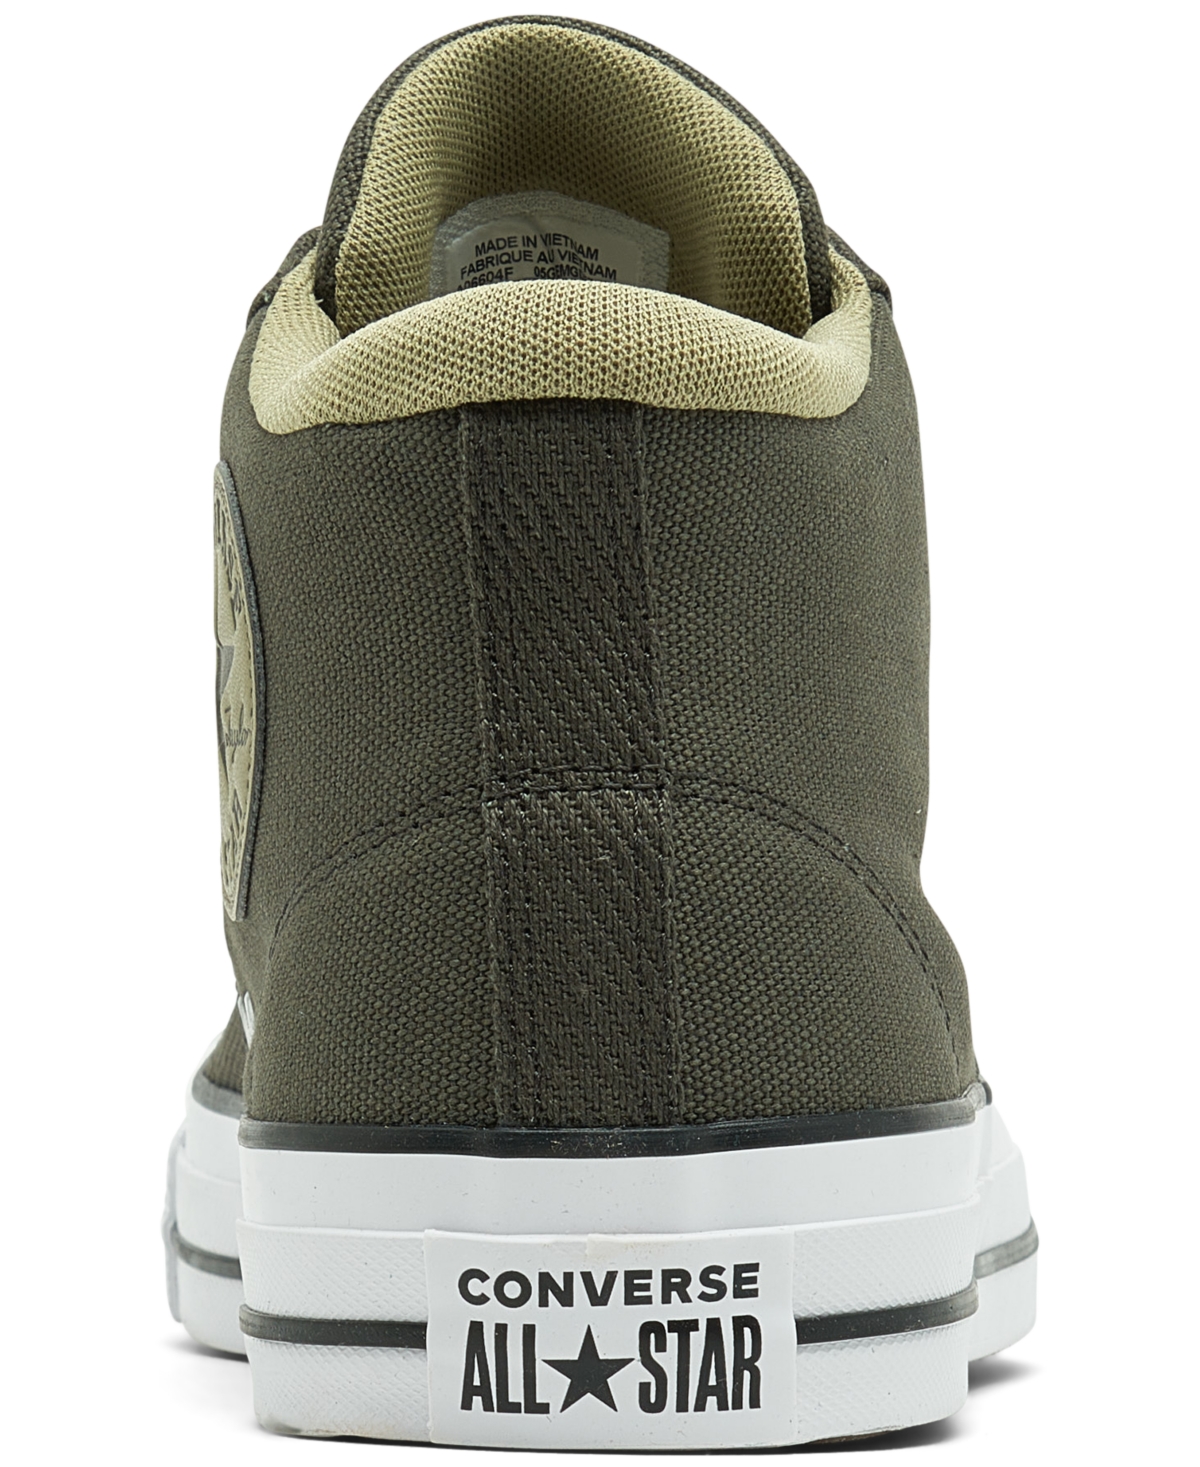 Shop Converse Men's Chuck Taylor All Star Malden Street Casual Sneakers From Finish Line In Cave Green,mossy Green